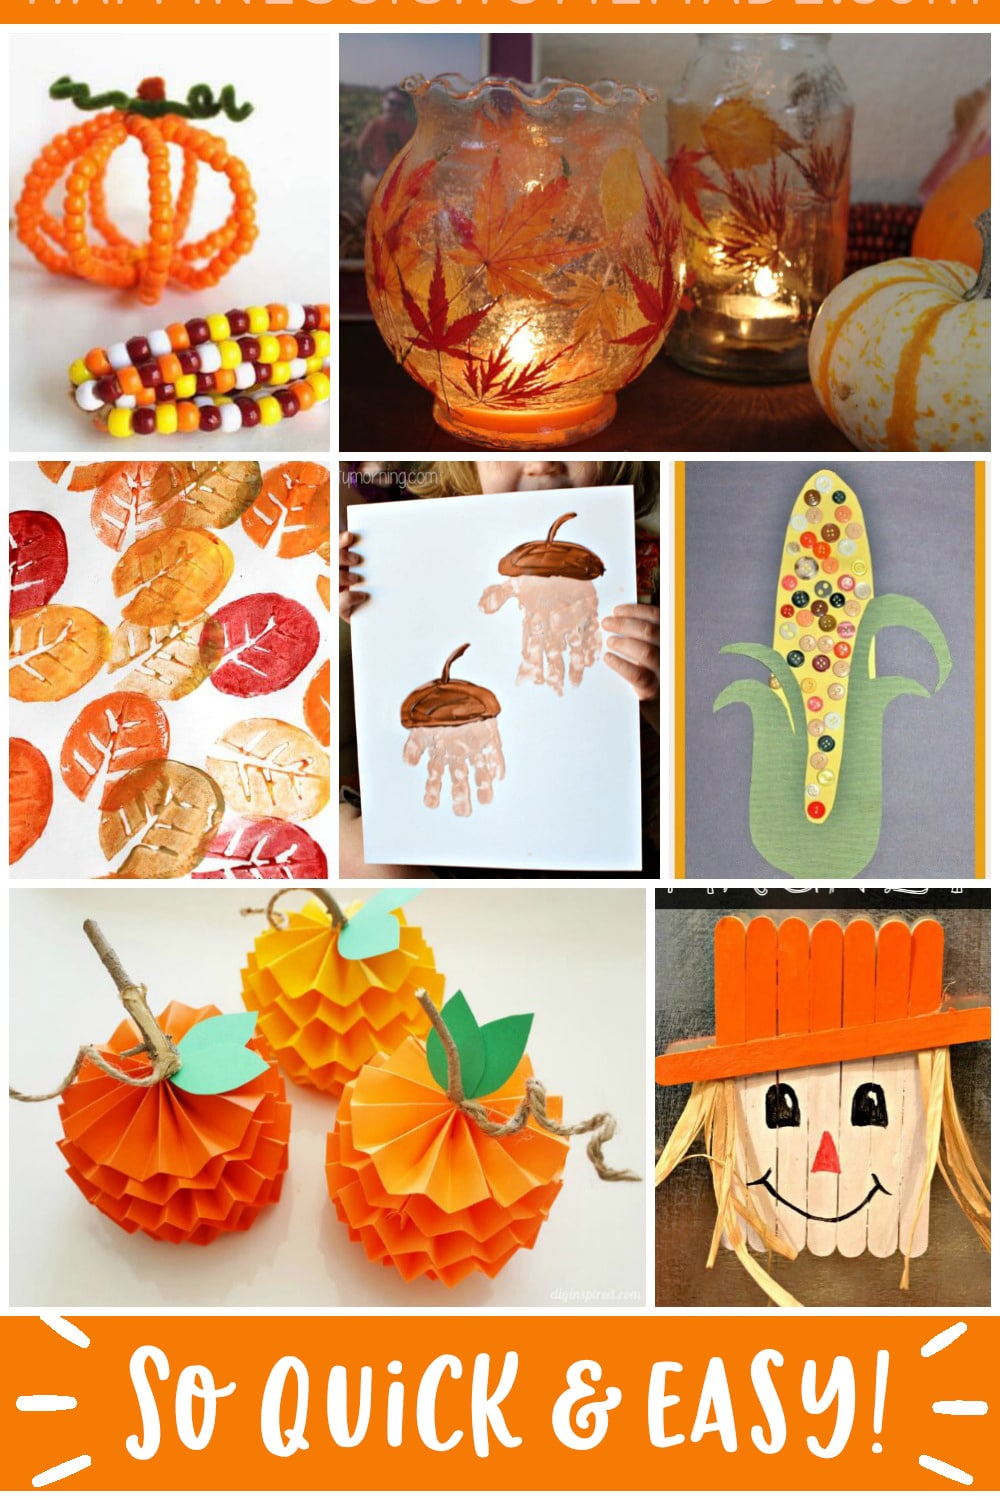 30+ Easy Fall Kids Crafts That Anyone Can Make! - Happiness is